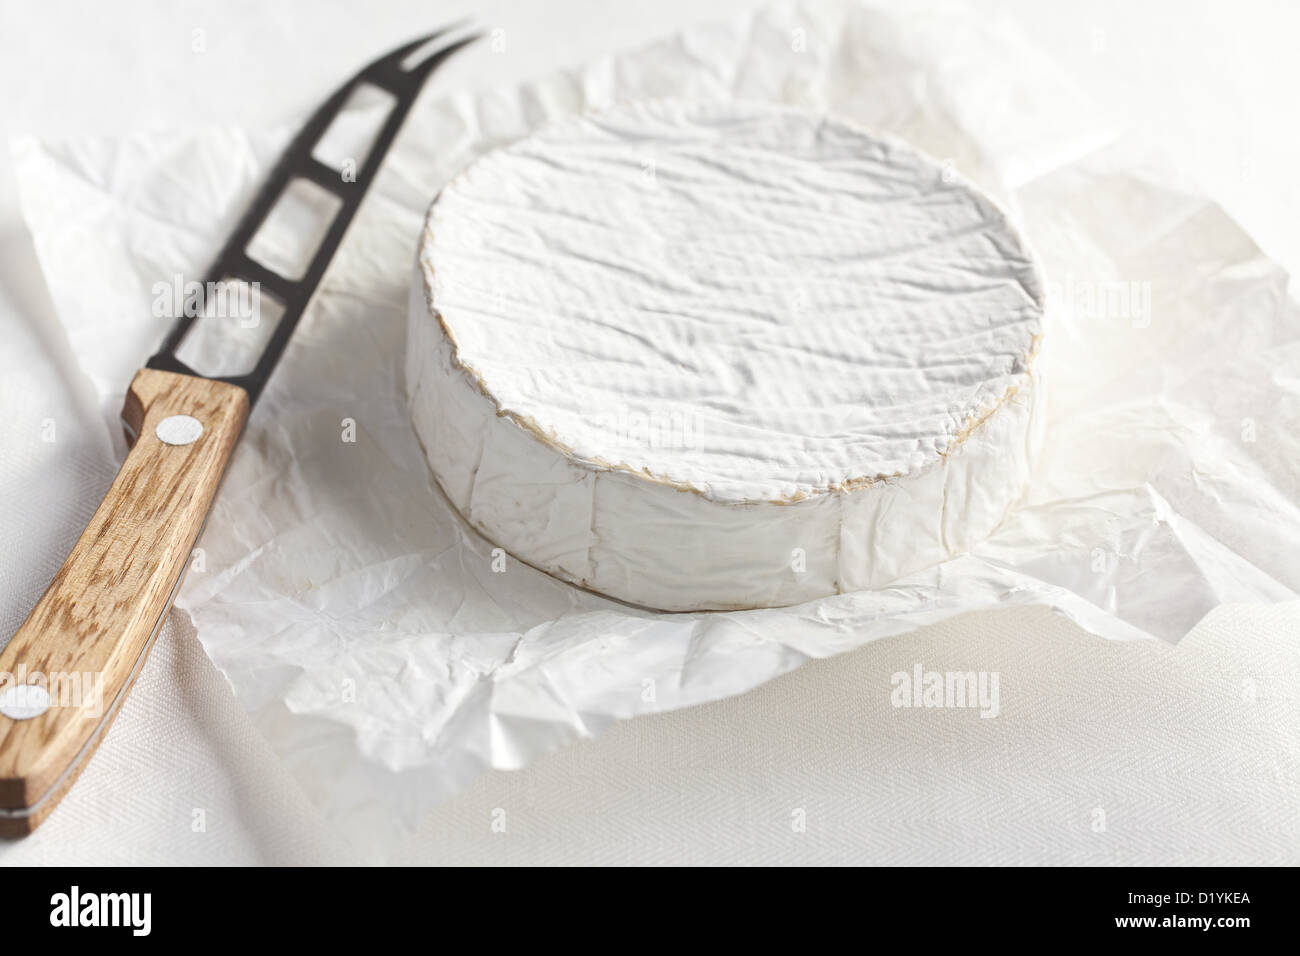 camembert cheese with knife on kitchen table Stock Photo